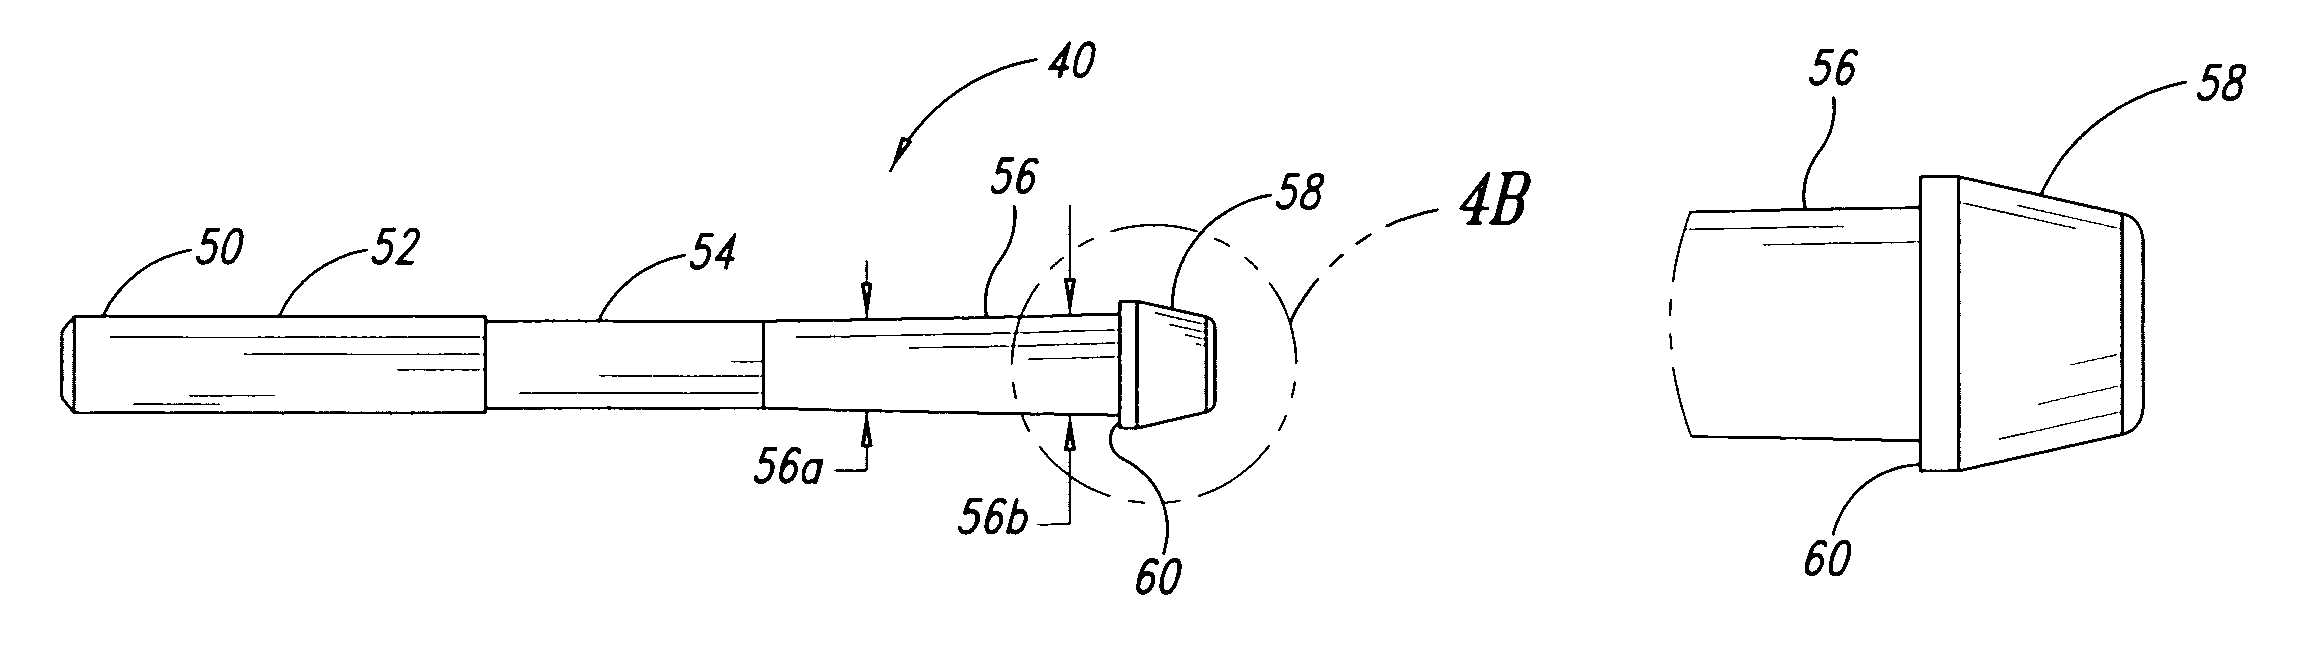 Mandrel assembly and method of using the same